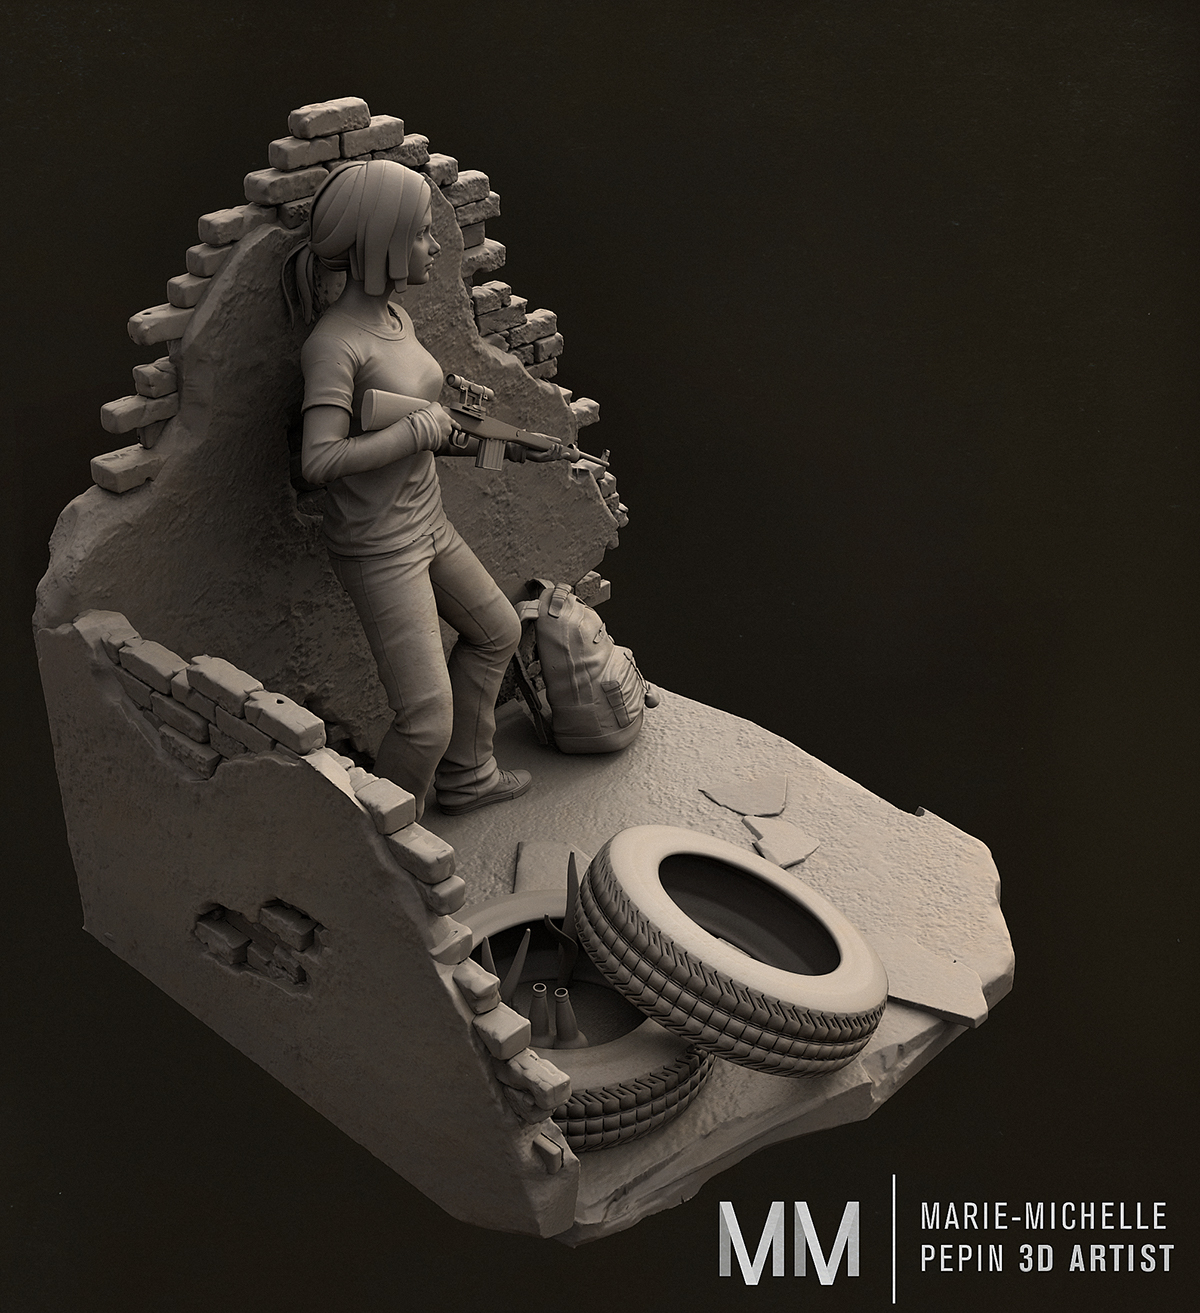 THE LAST OF Us last of us 3D Zbrush Diorama Sculpt base turntable video game polycount Ellie